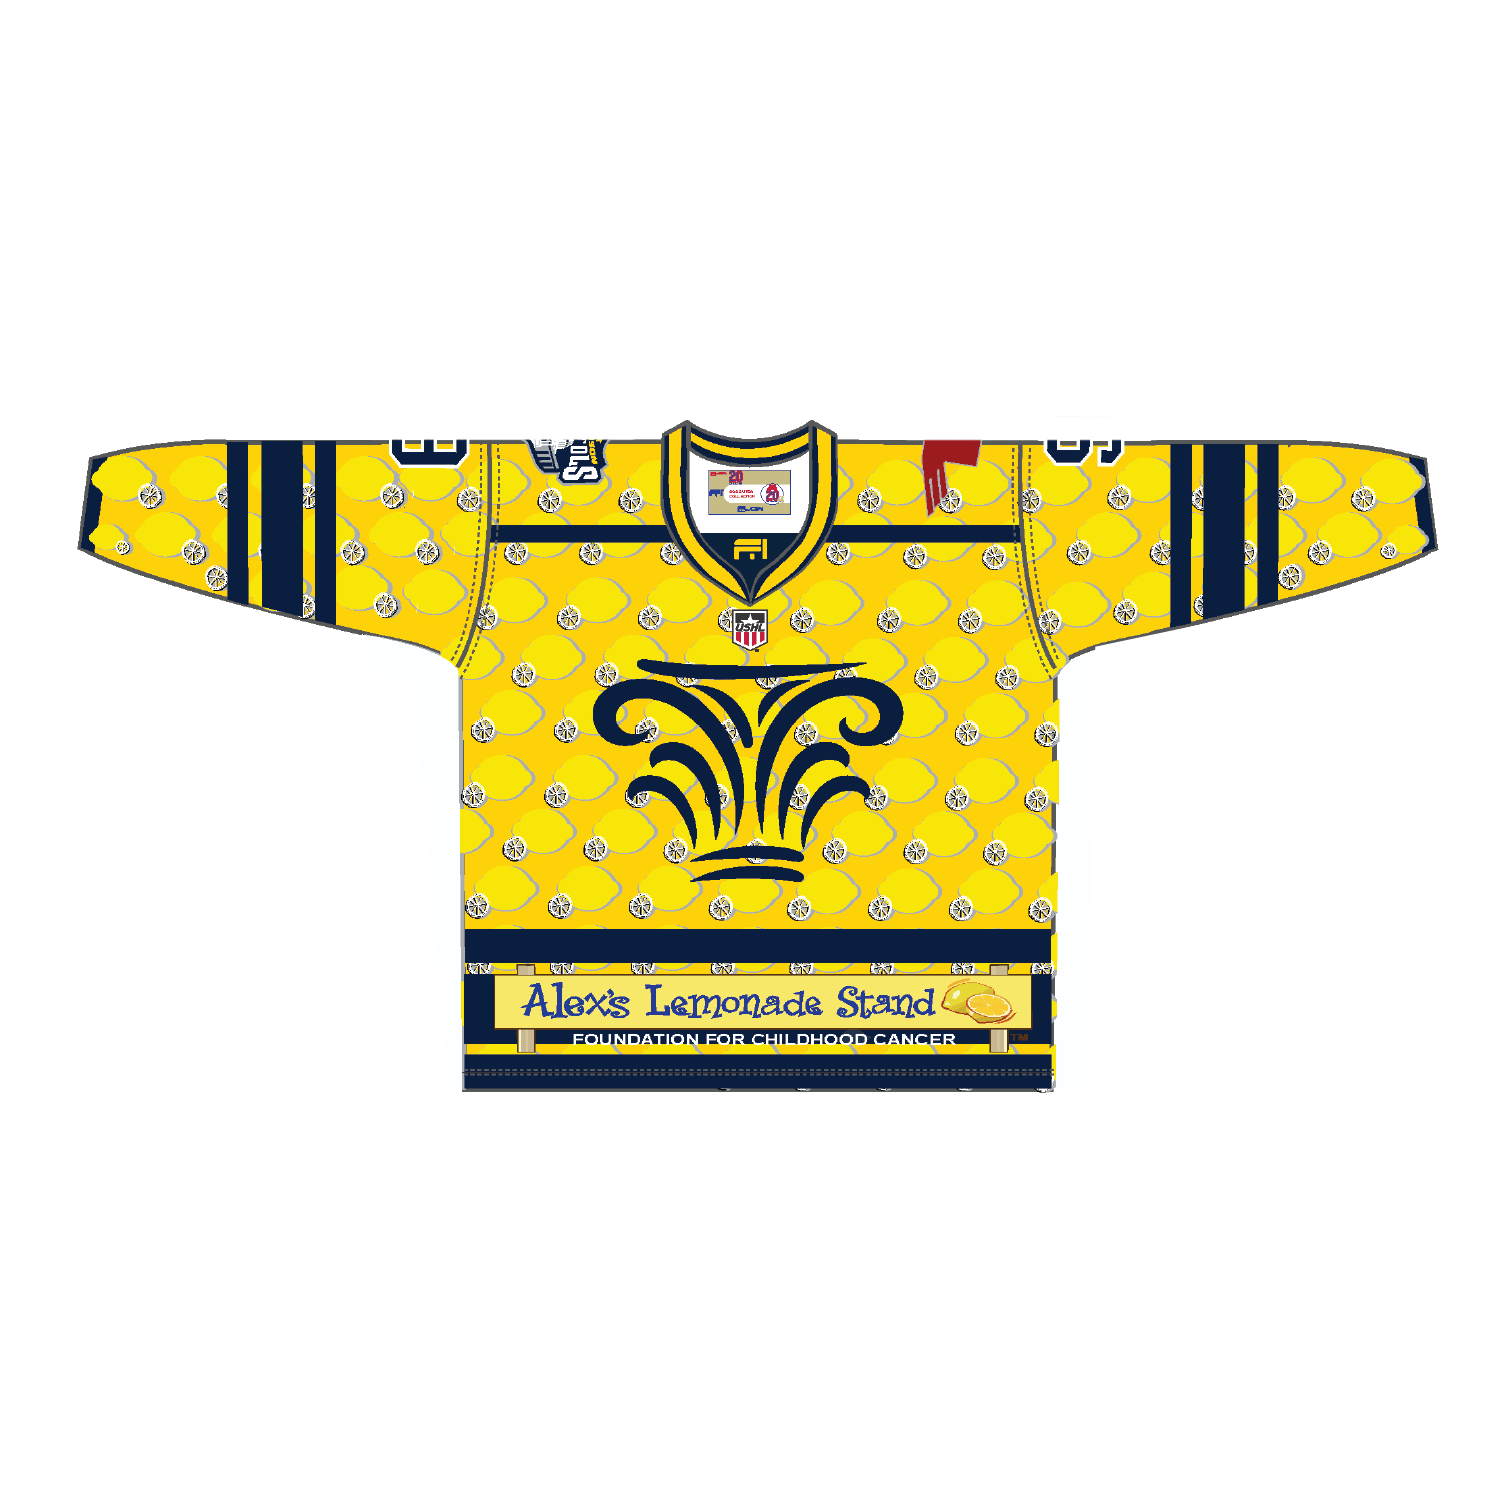 Sublimated Reversible Hockey Jersey - Your Design (Model)